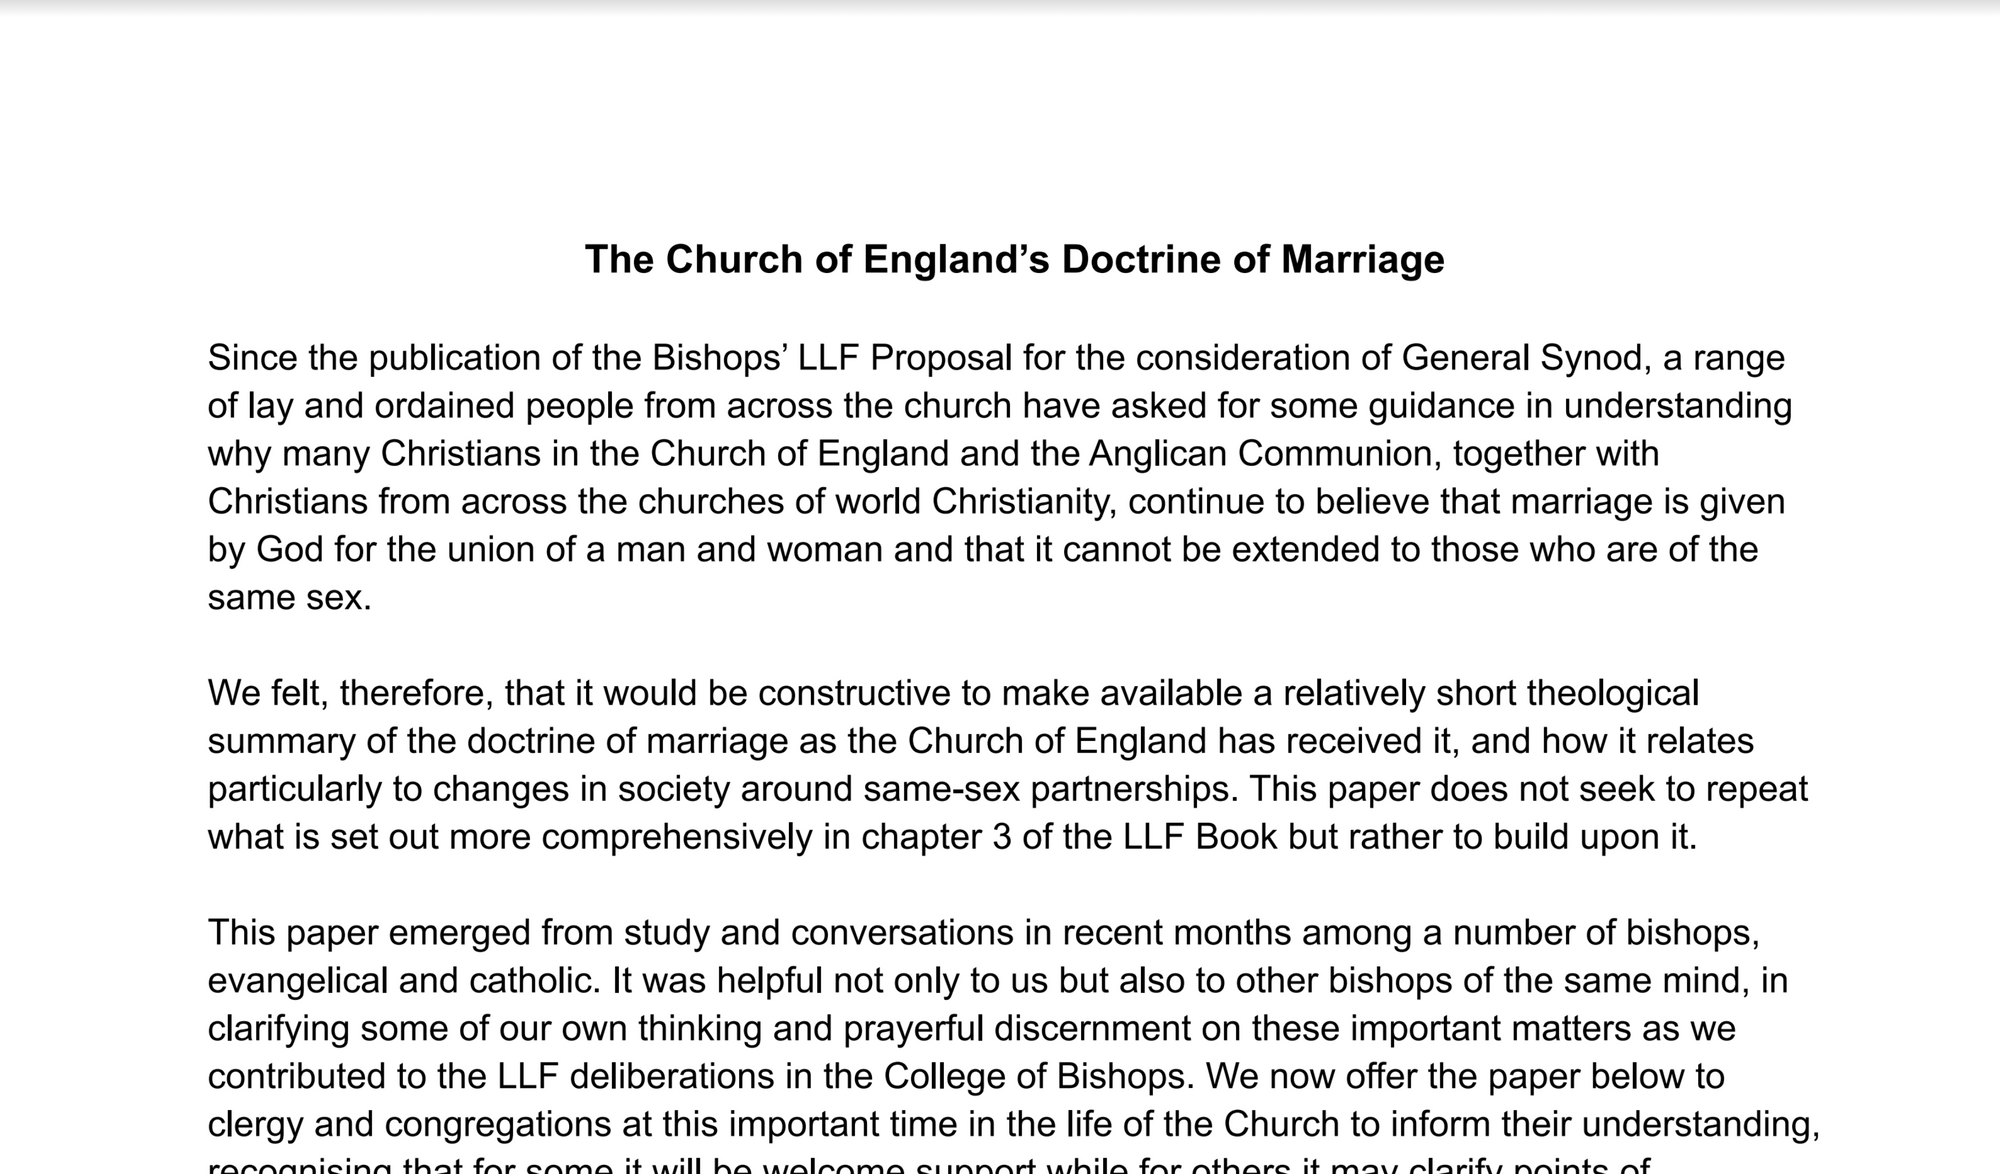 Bishops' Statement on the Doctrine of Marriage